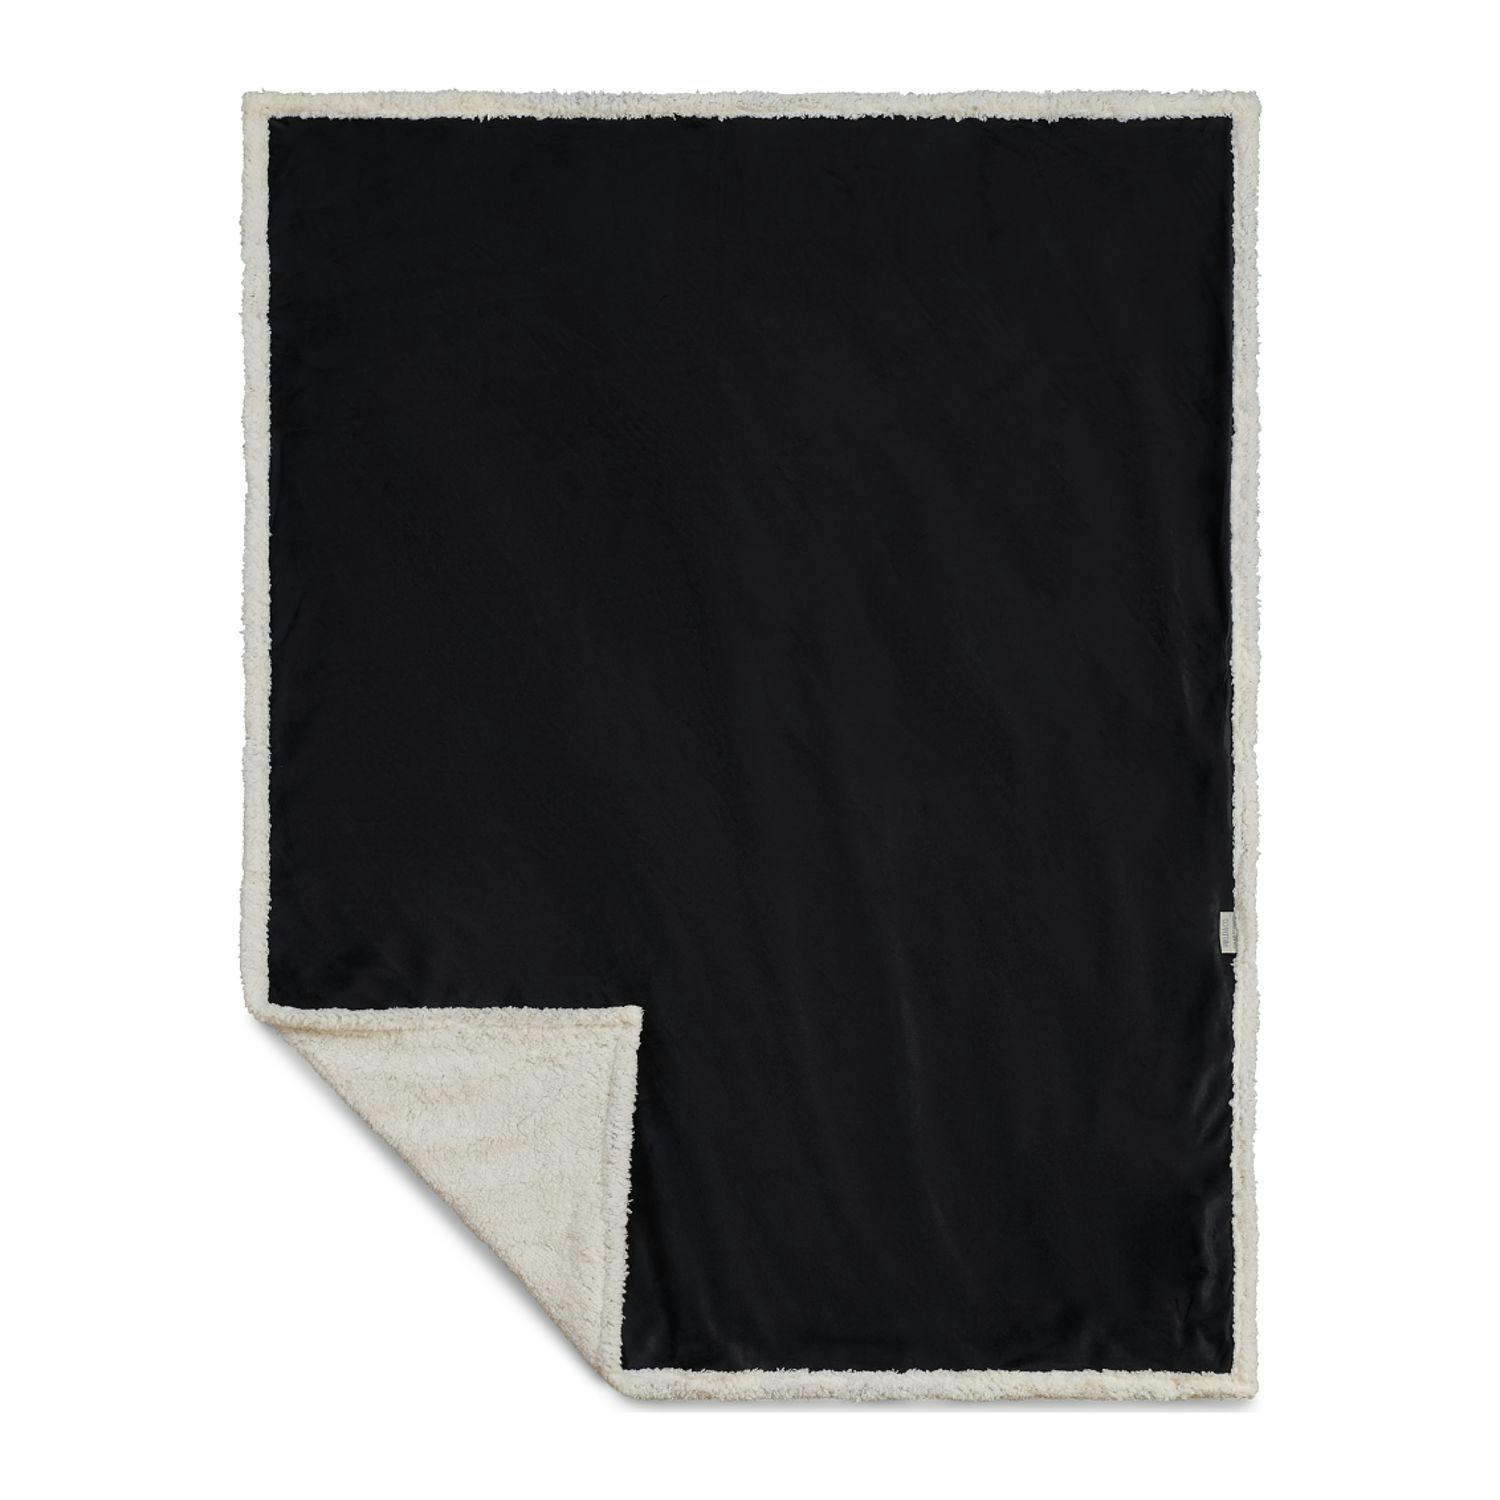 Field & Co. 100% Recycled PET Sherpa Blanket - additional Image 3